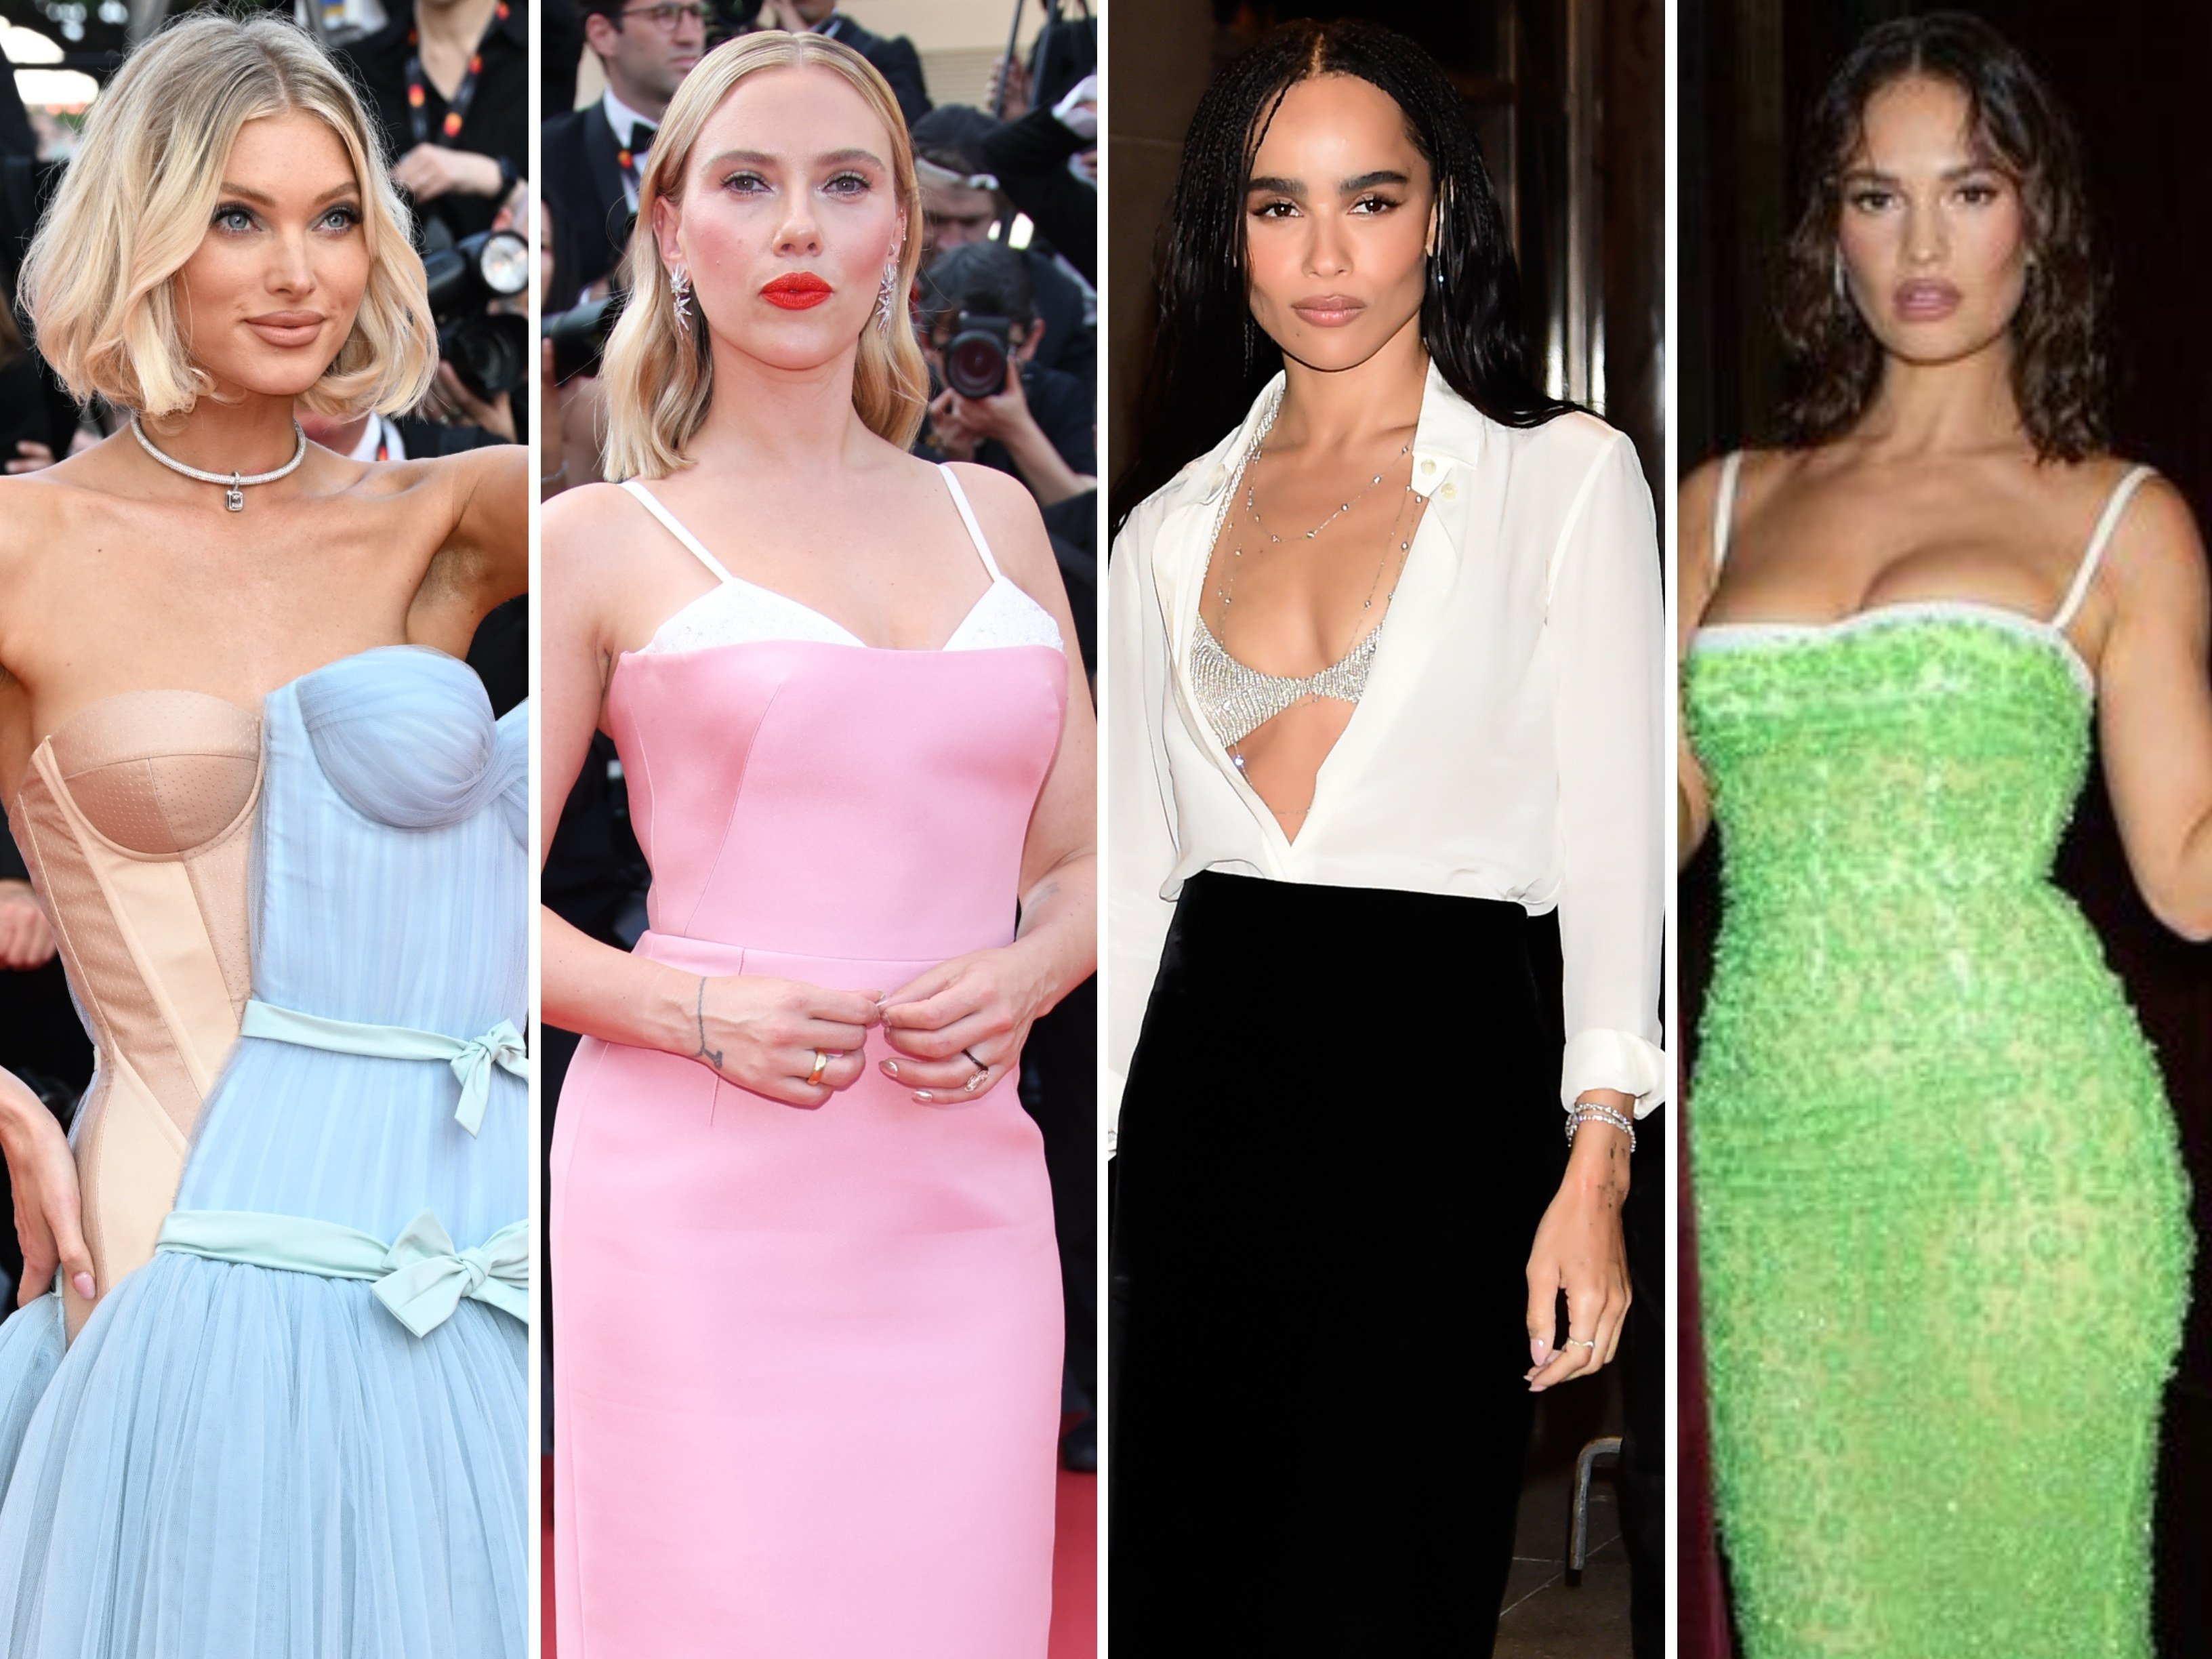 How to show off your bra under summer clothes: 5 tips inspired by street  style stars - FASHION Magazine